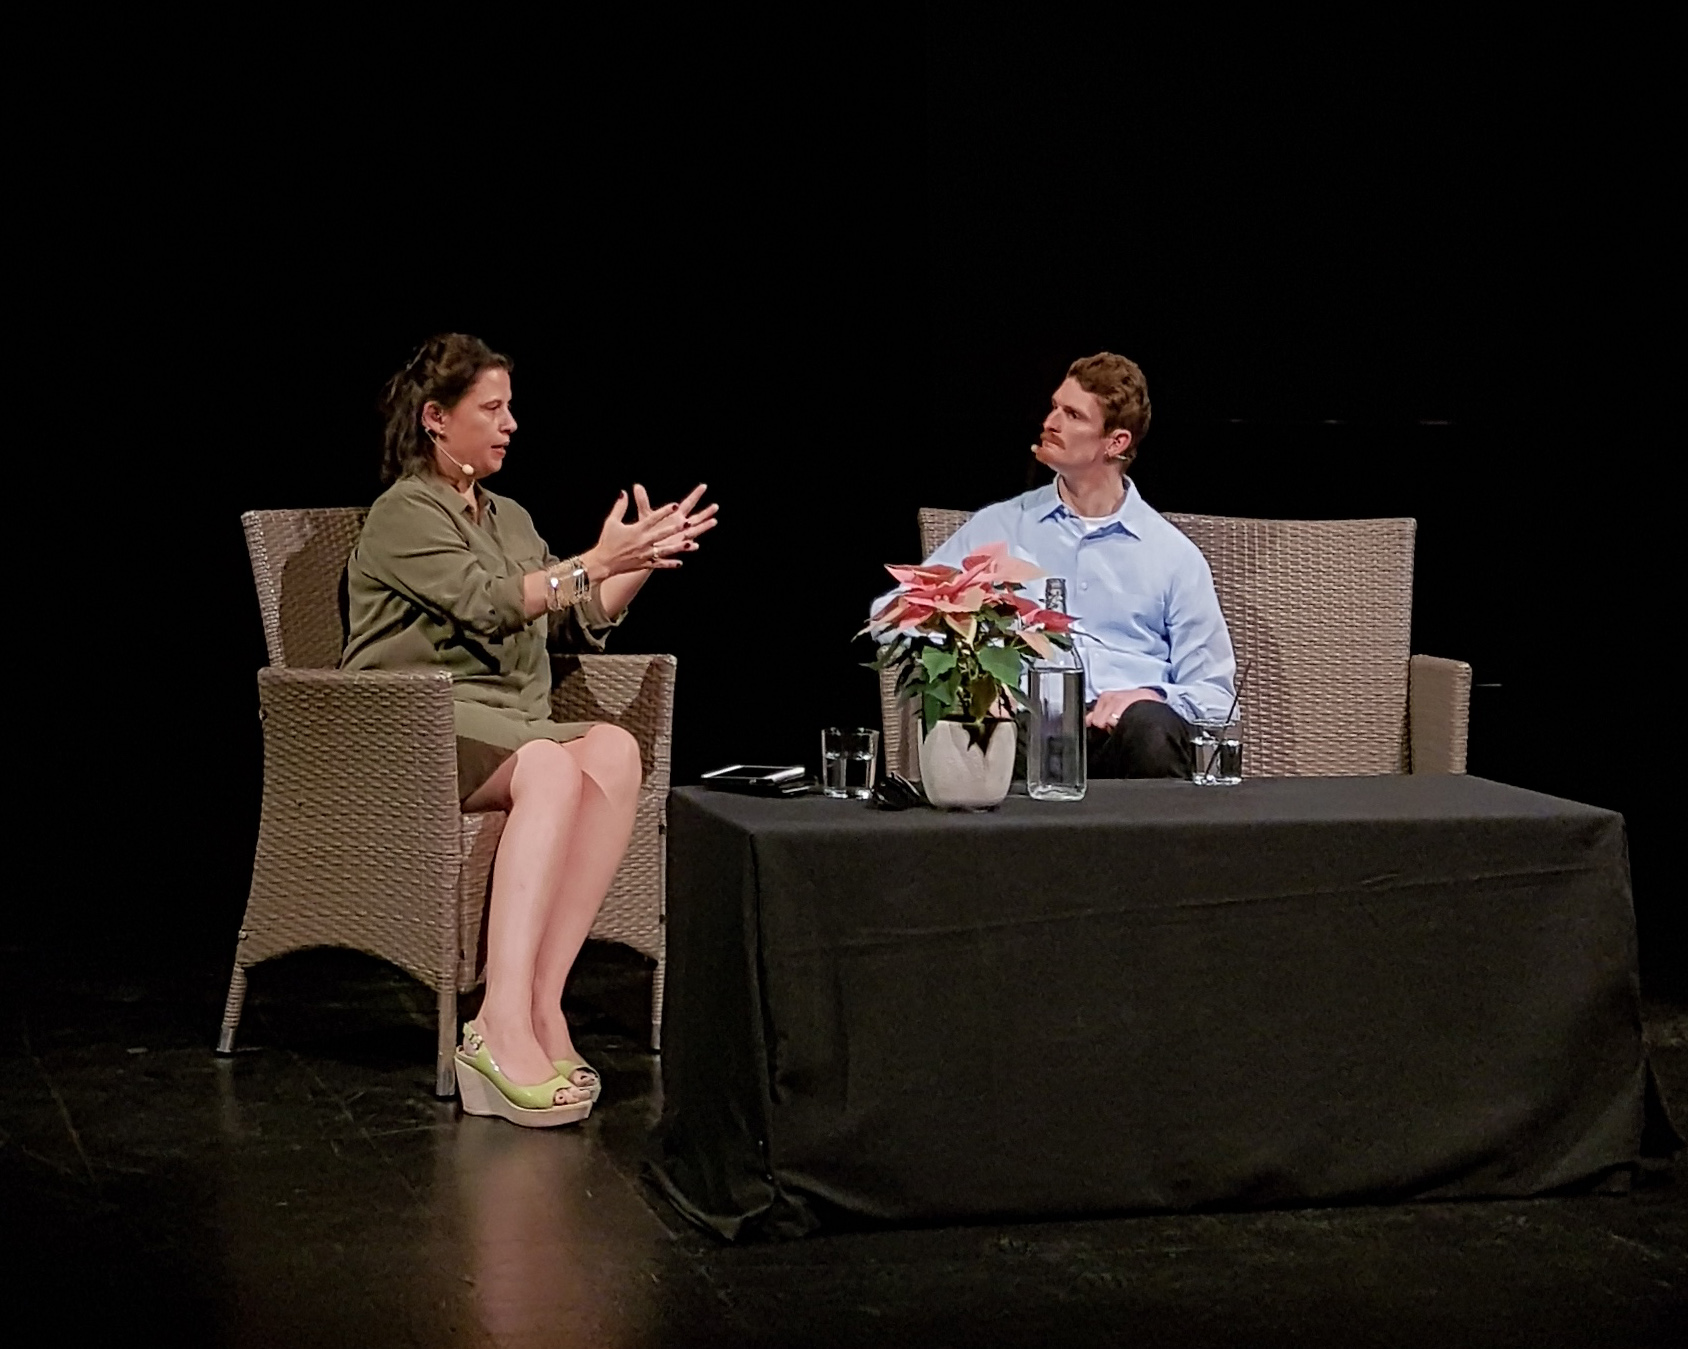 Michelle Silby sits on a chair. She wears a green dress and is gesturing with her hands while facing Dan Daw. Dan sits in a chair facing Michelle and is looking at her. The background is dark